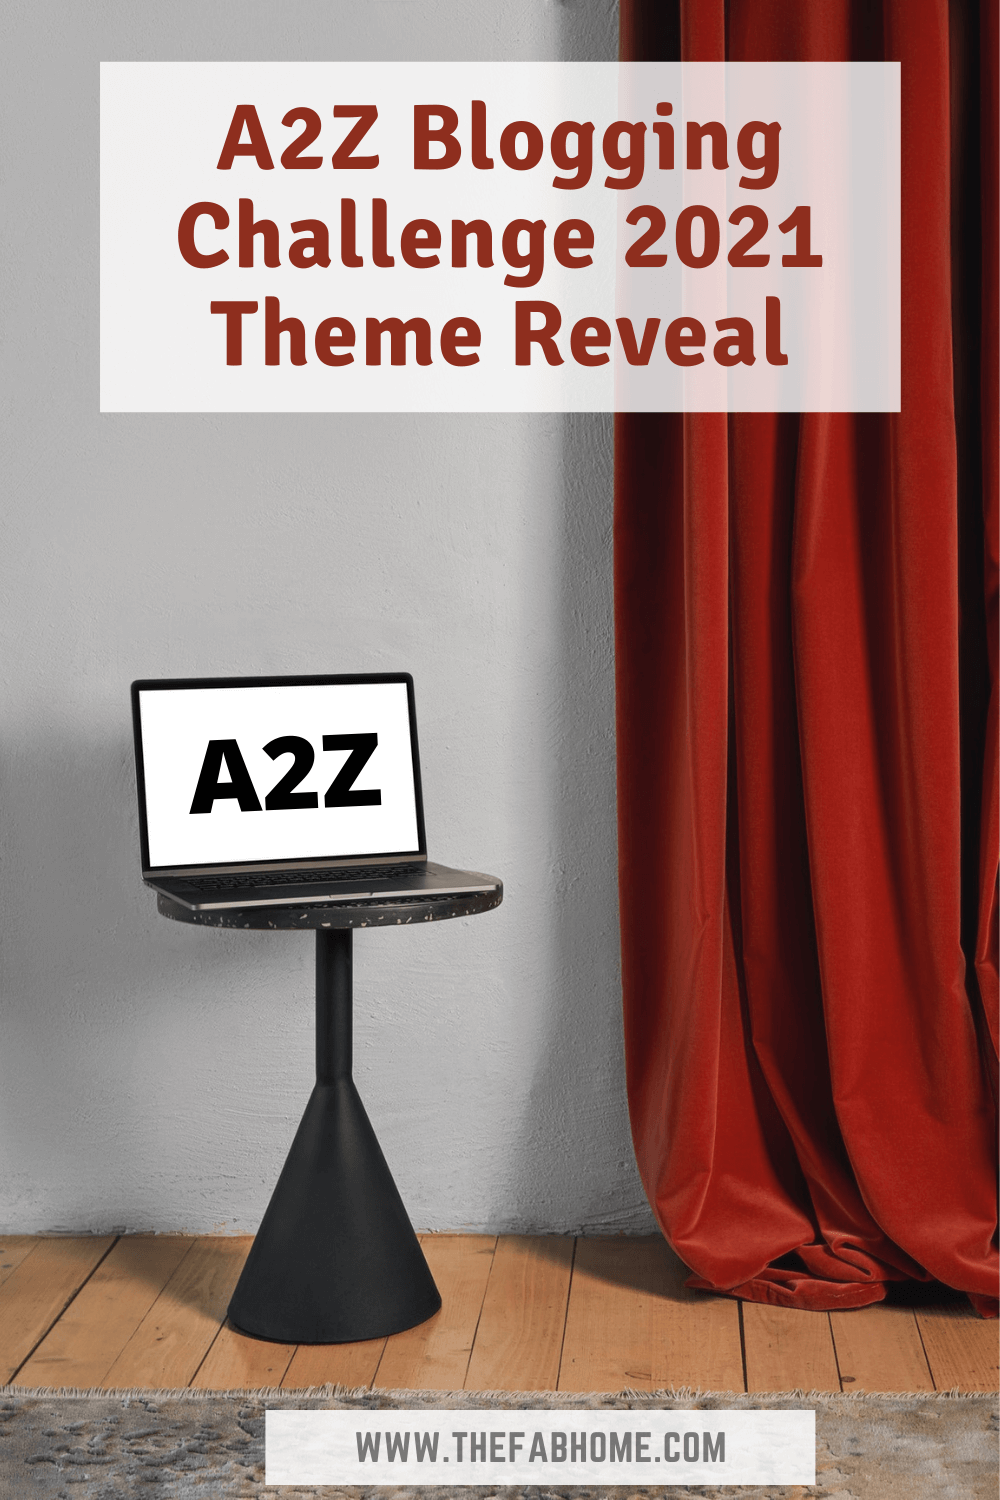 The Blogchatter A2Z Blogging Challenge 2021 is just around the corner and it's time for a grand Theme Reveal! Watch out for 26 awesome posts coming up!